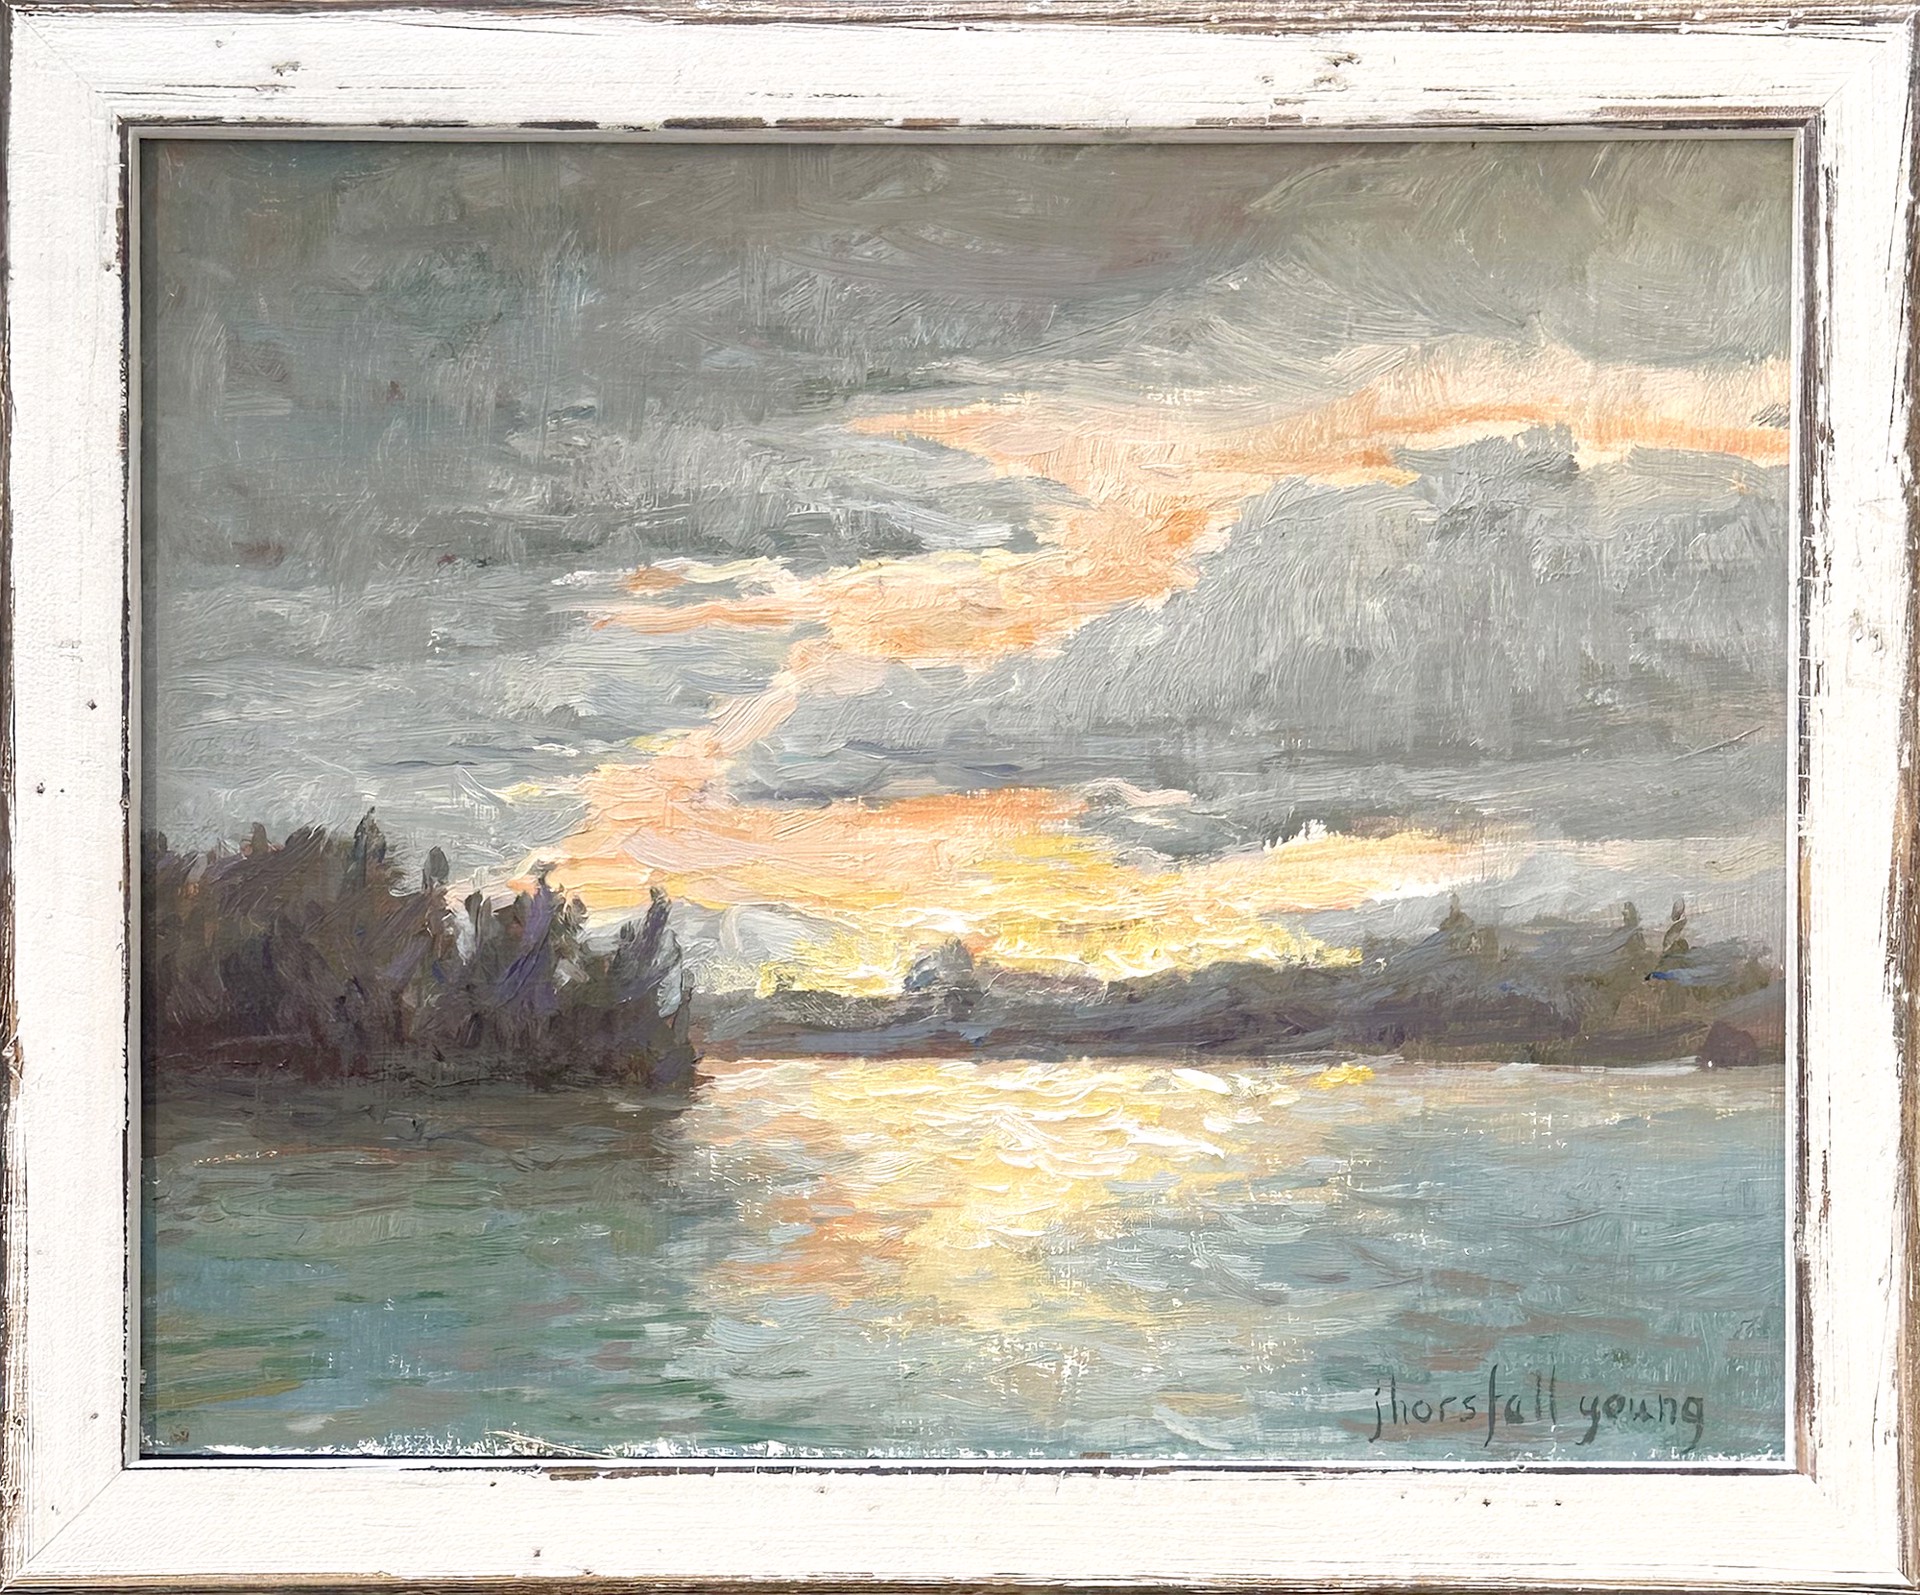 Sunrise on the Lake by Joan Horsfall Young